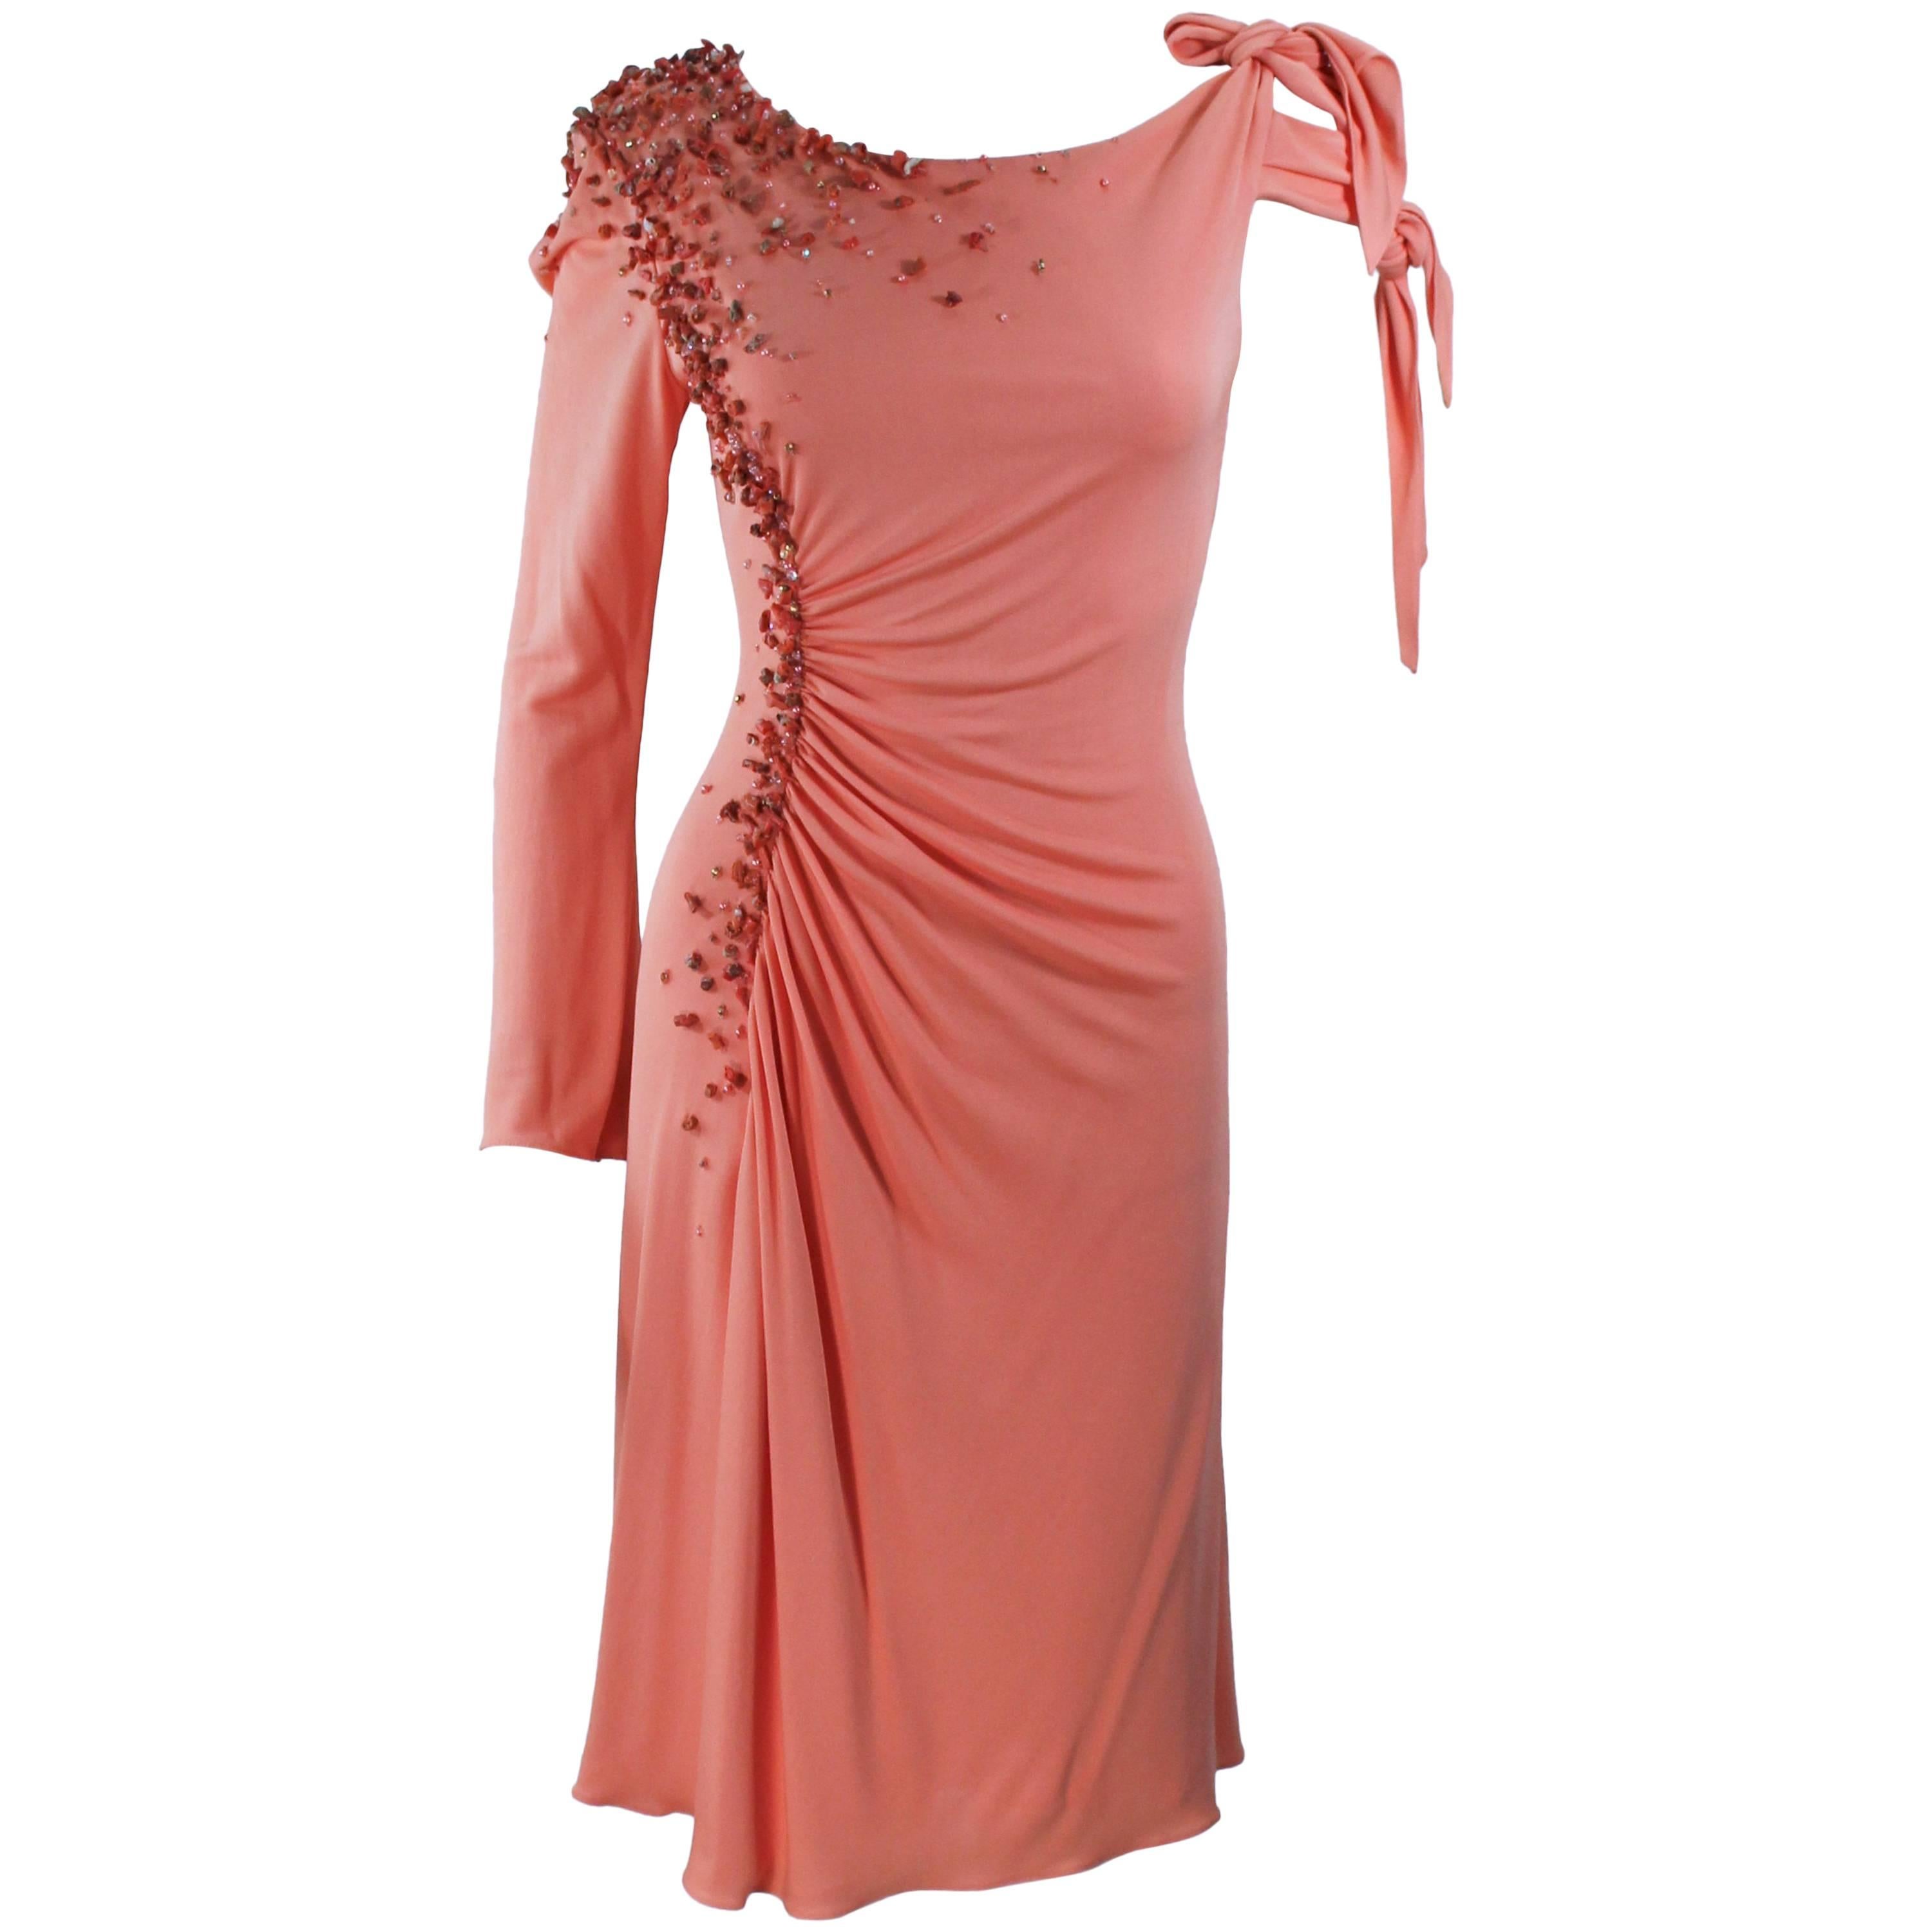 MARK ZUNINO Coral Jersey Cocktail Dress with Coral Beading Applique Size 6 8